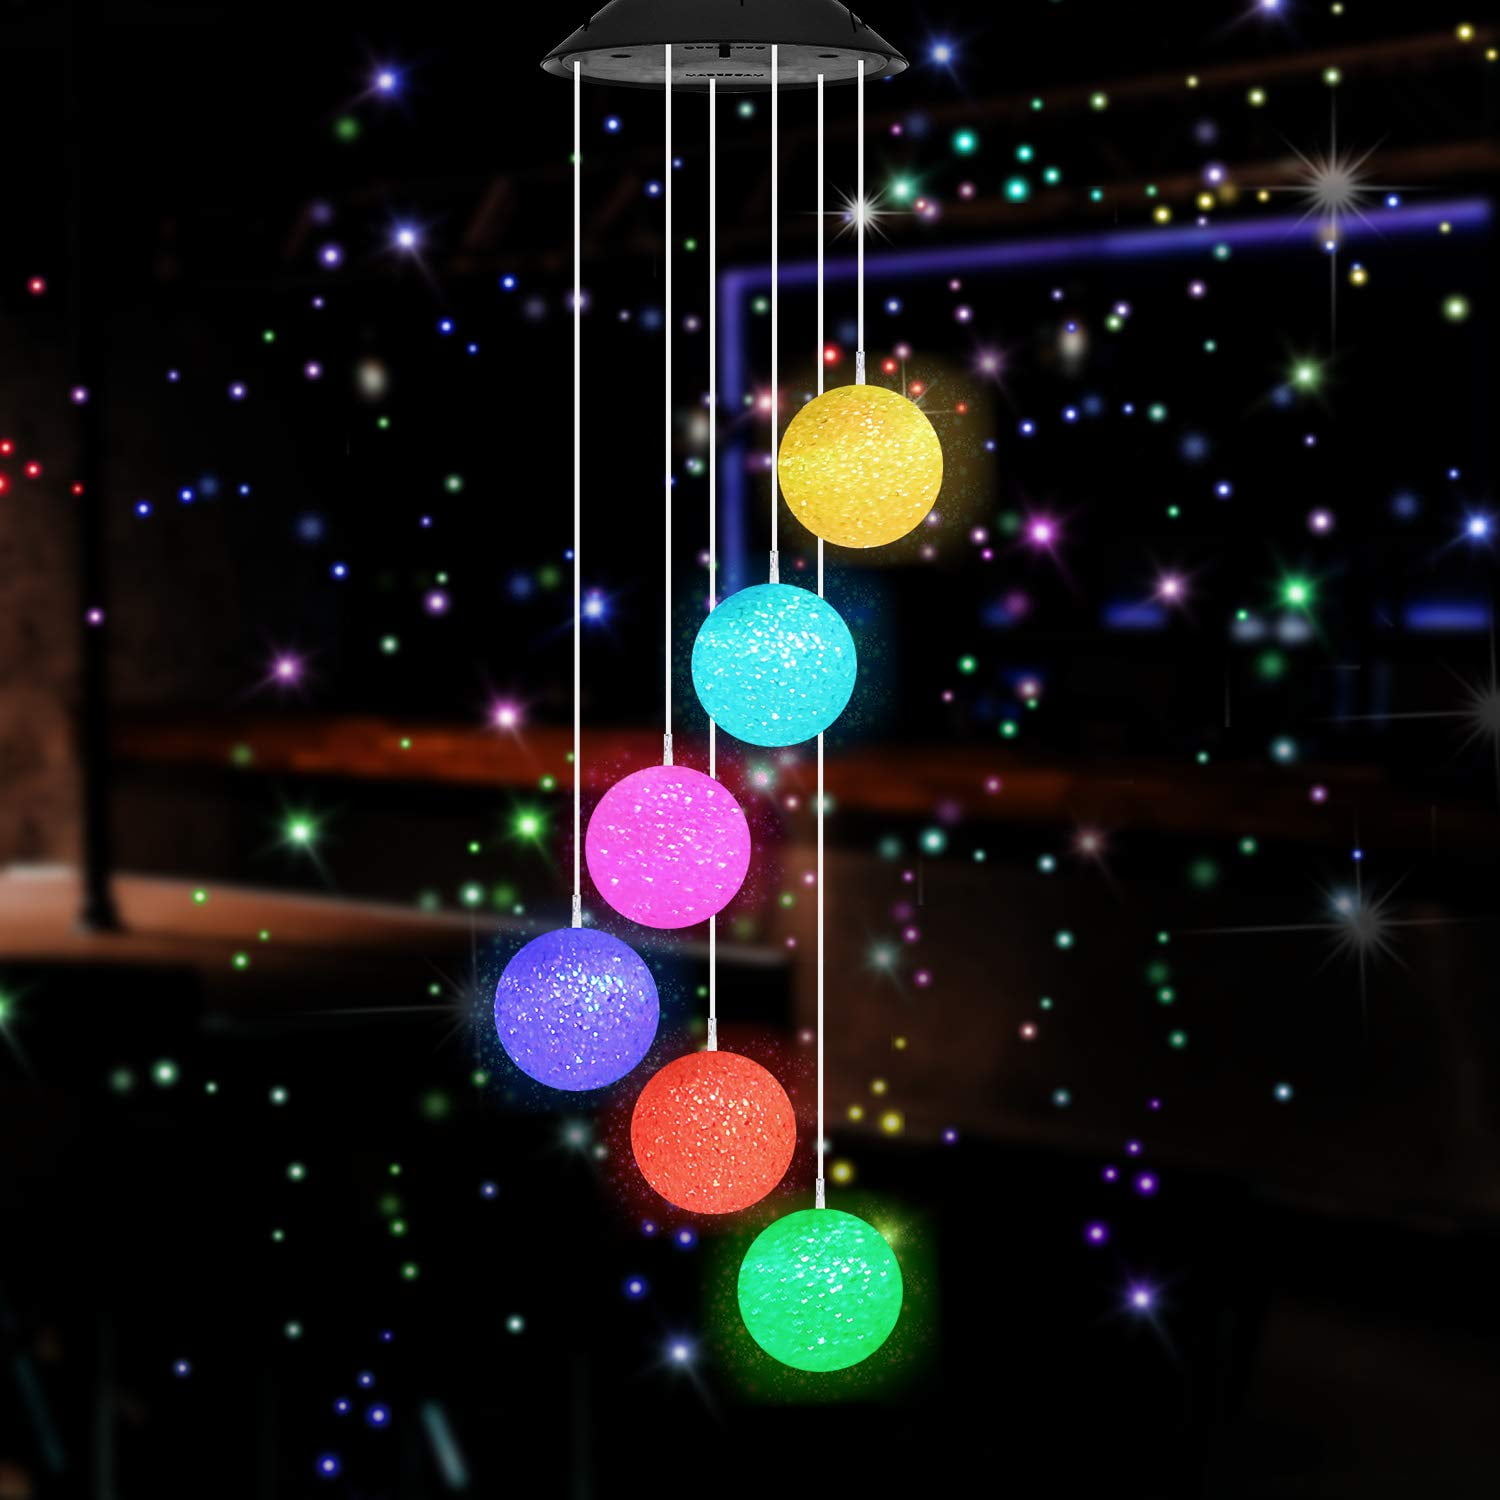 Solar Stars Wind Chimes Outdoor Waterproof Solar Powered LED Changing Light Color 6 Stars Mobile Romantic Wind-Bell for Home,Party,Festival Decor,Night Garden Decoration,Gifts for Mom Blackboard 